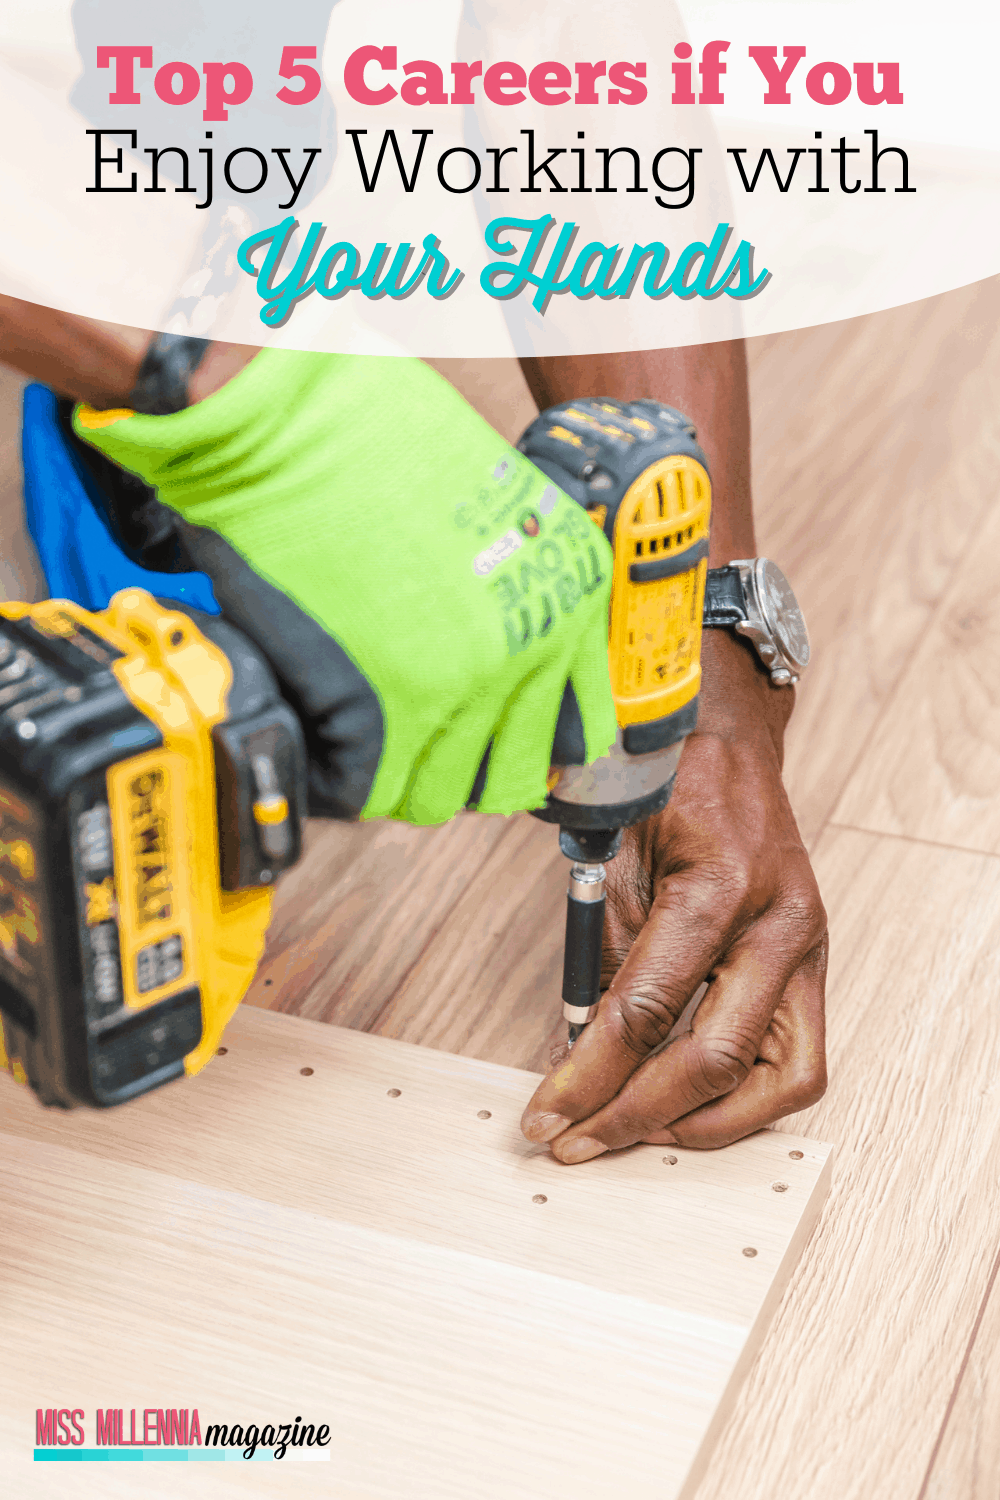 Top 5 Careers if You Enjoy Working With Your Hands